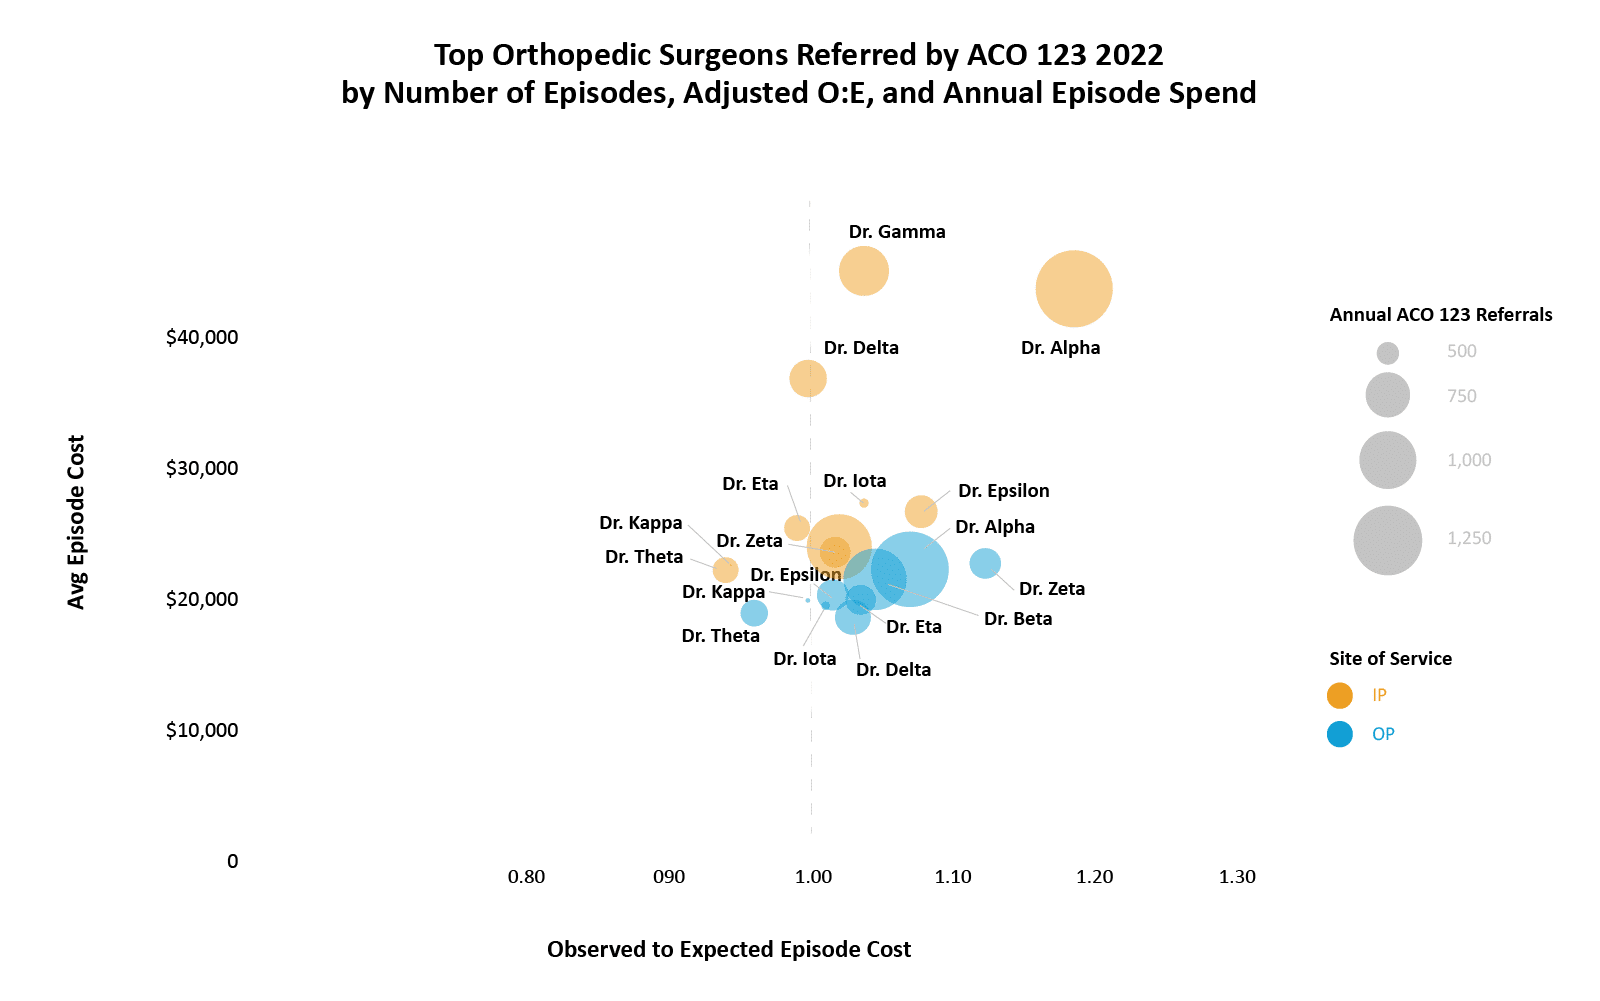 Top Orthopedic Surgeons Referred by ACO 123 2022by Number of Episodes, Adjusted O:E, and Annual Episode Spend